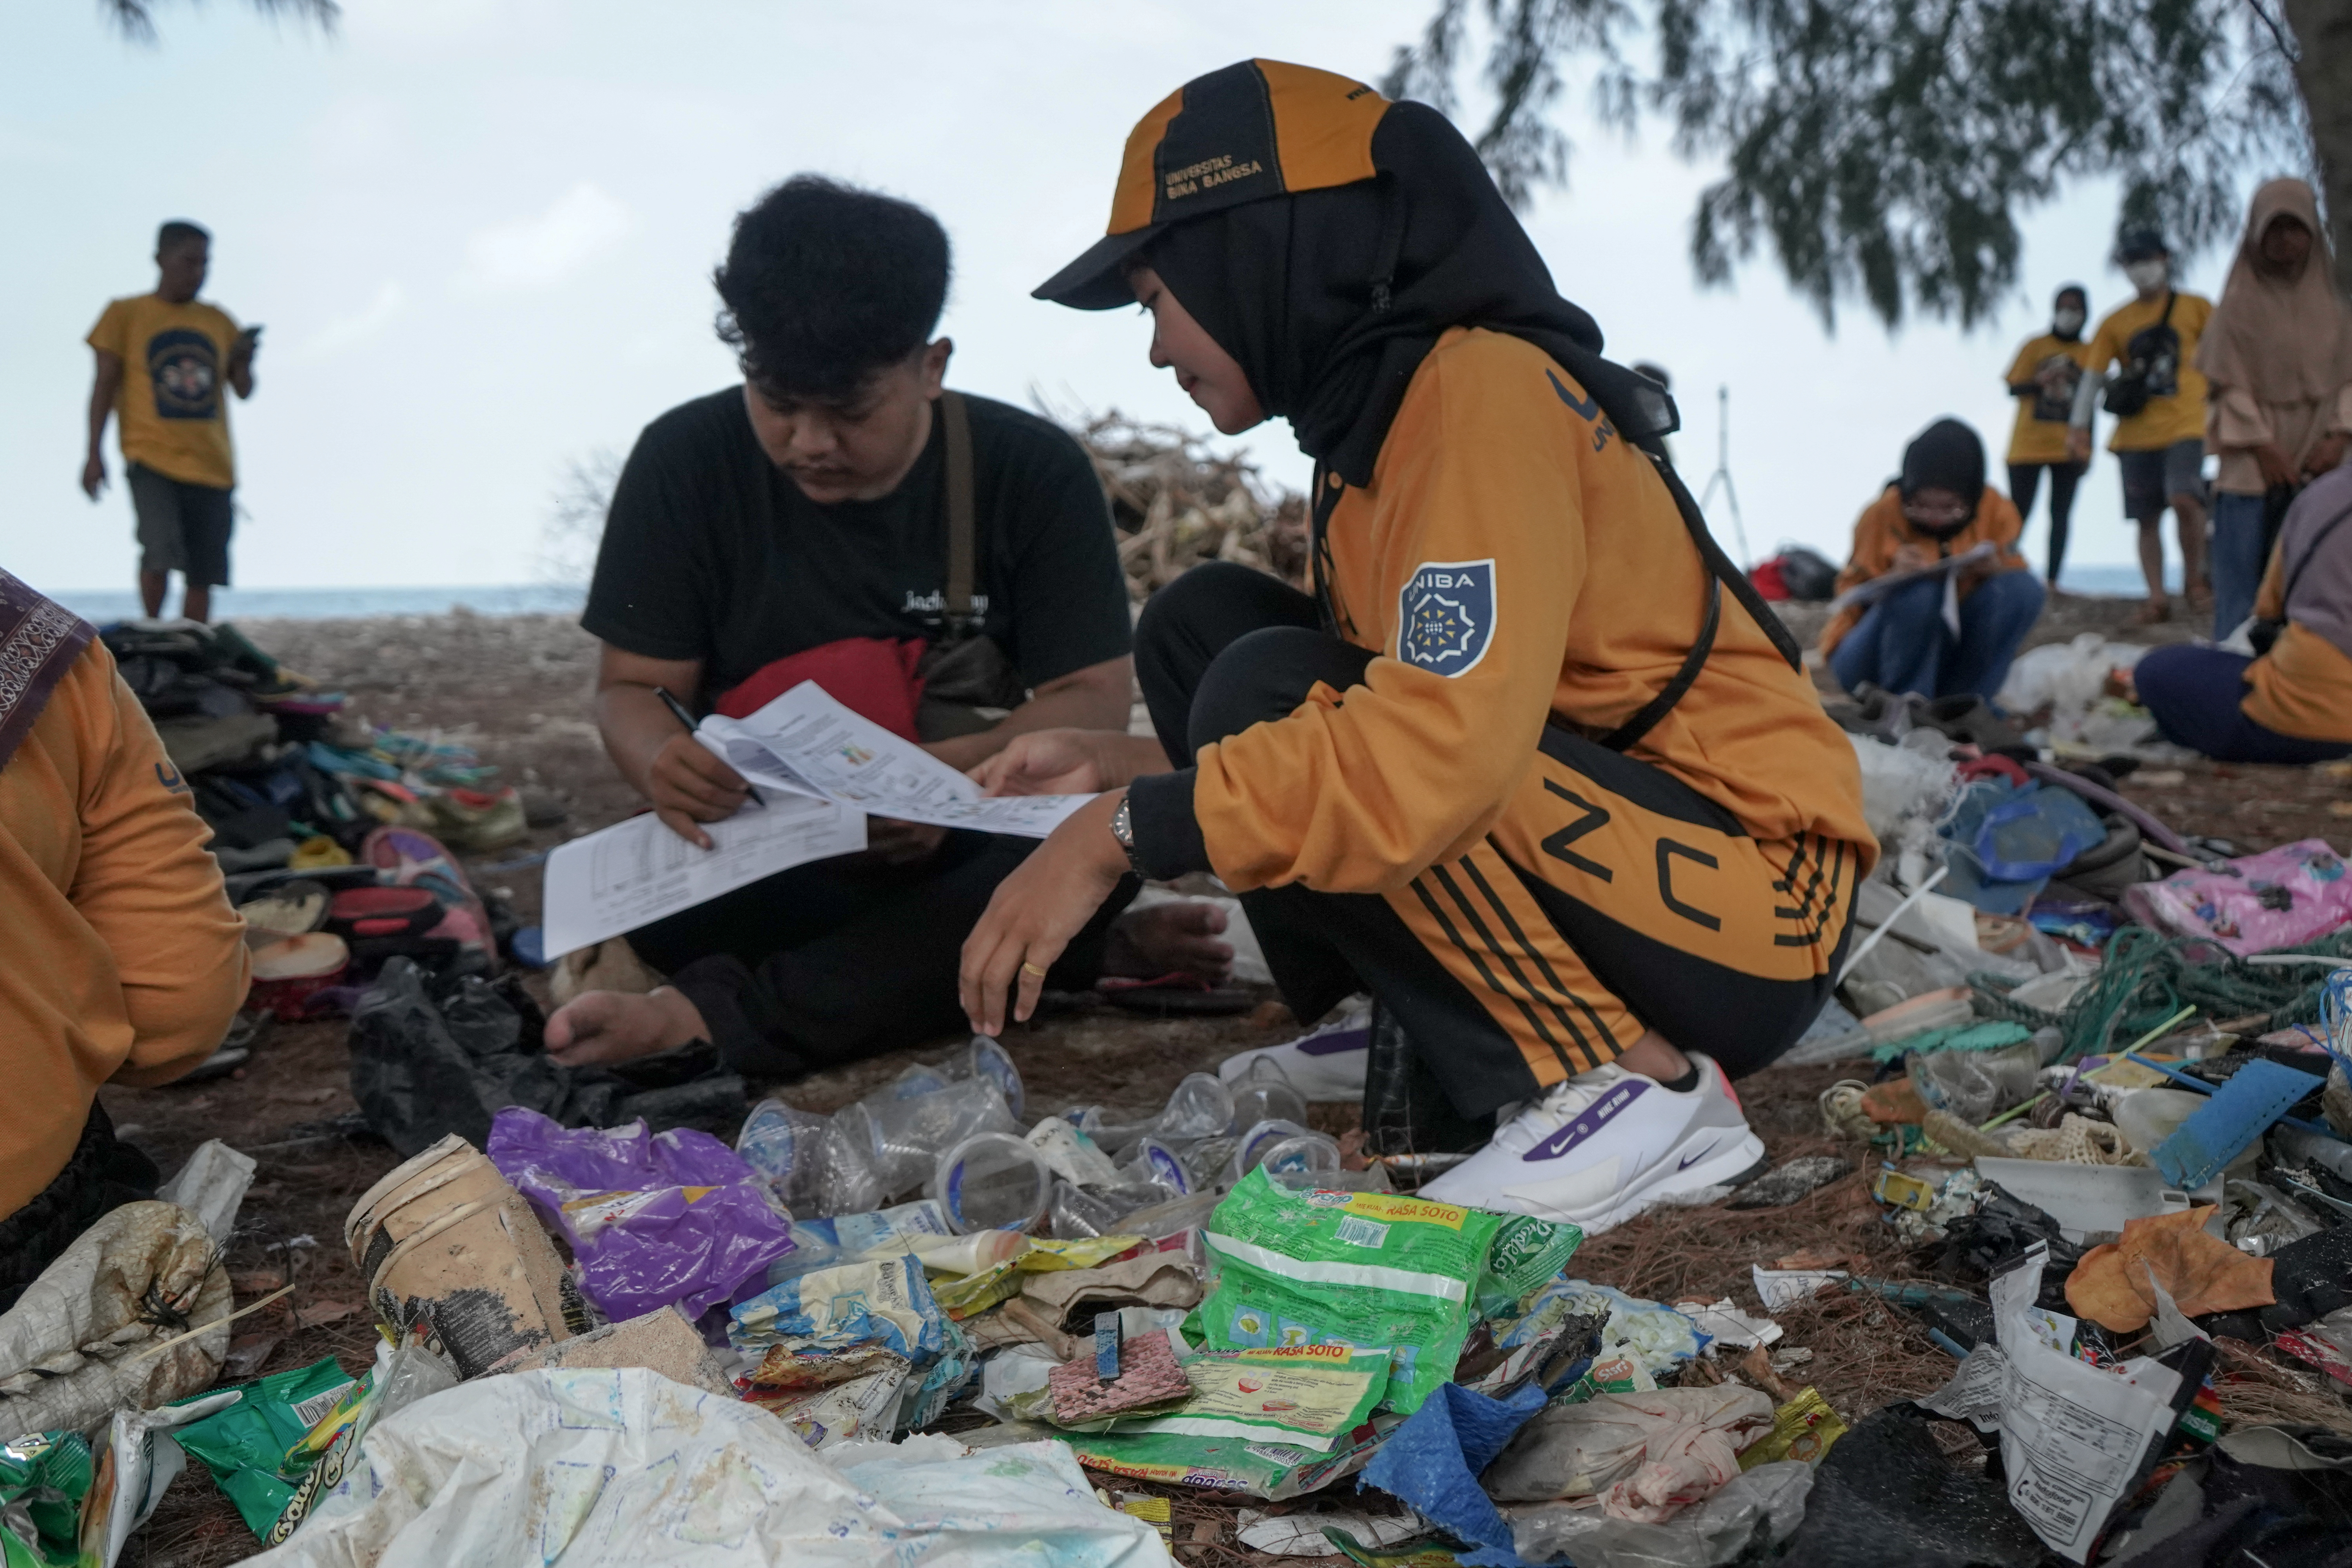 Image taken at the 2022 brand audit in Indonesia with Greenpeace Ocean Defender. A young person in the foreground is pictured holding an identification sheet while another person records data.